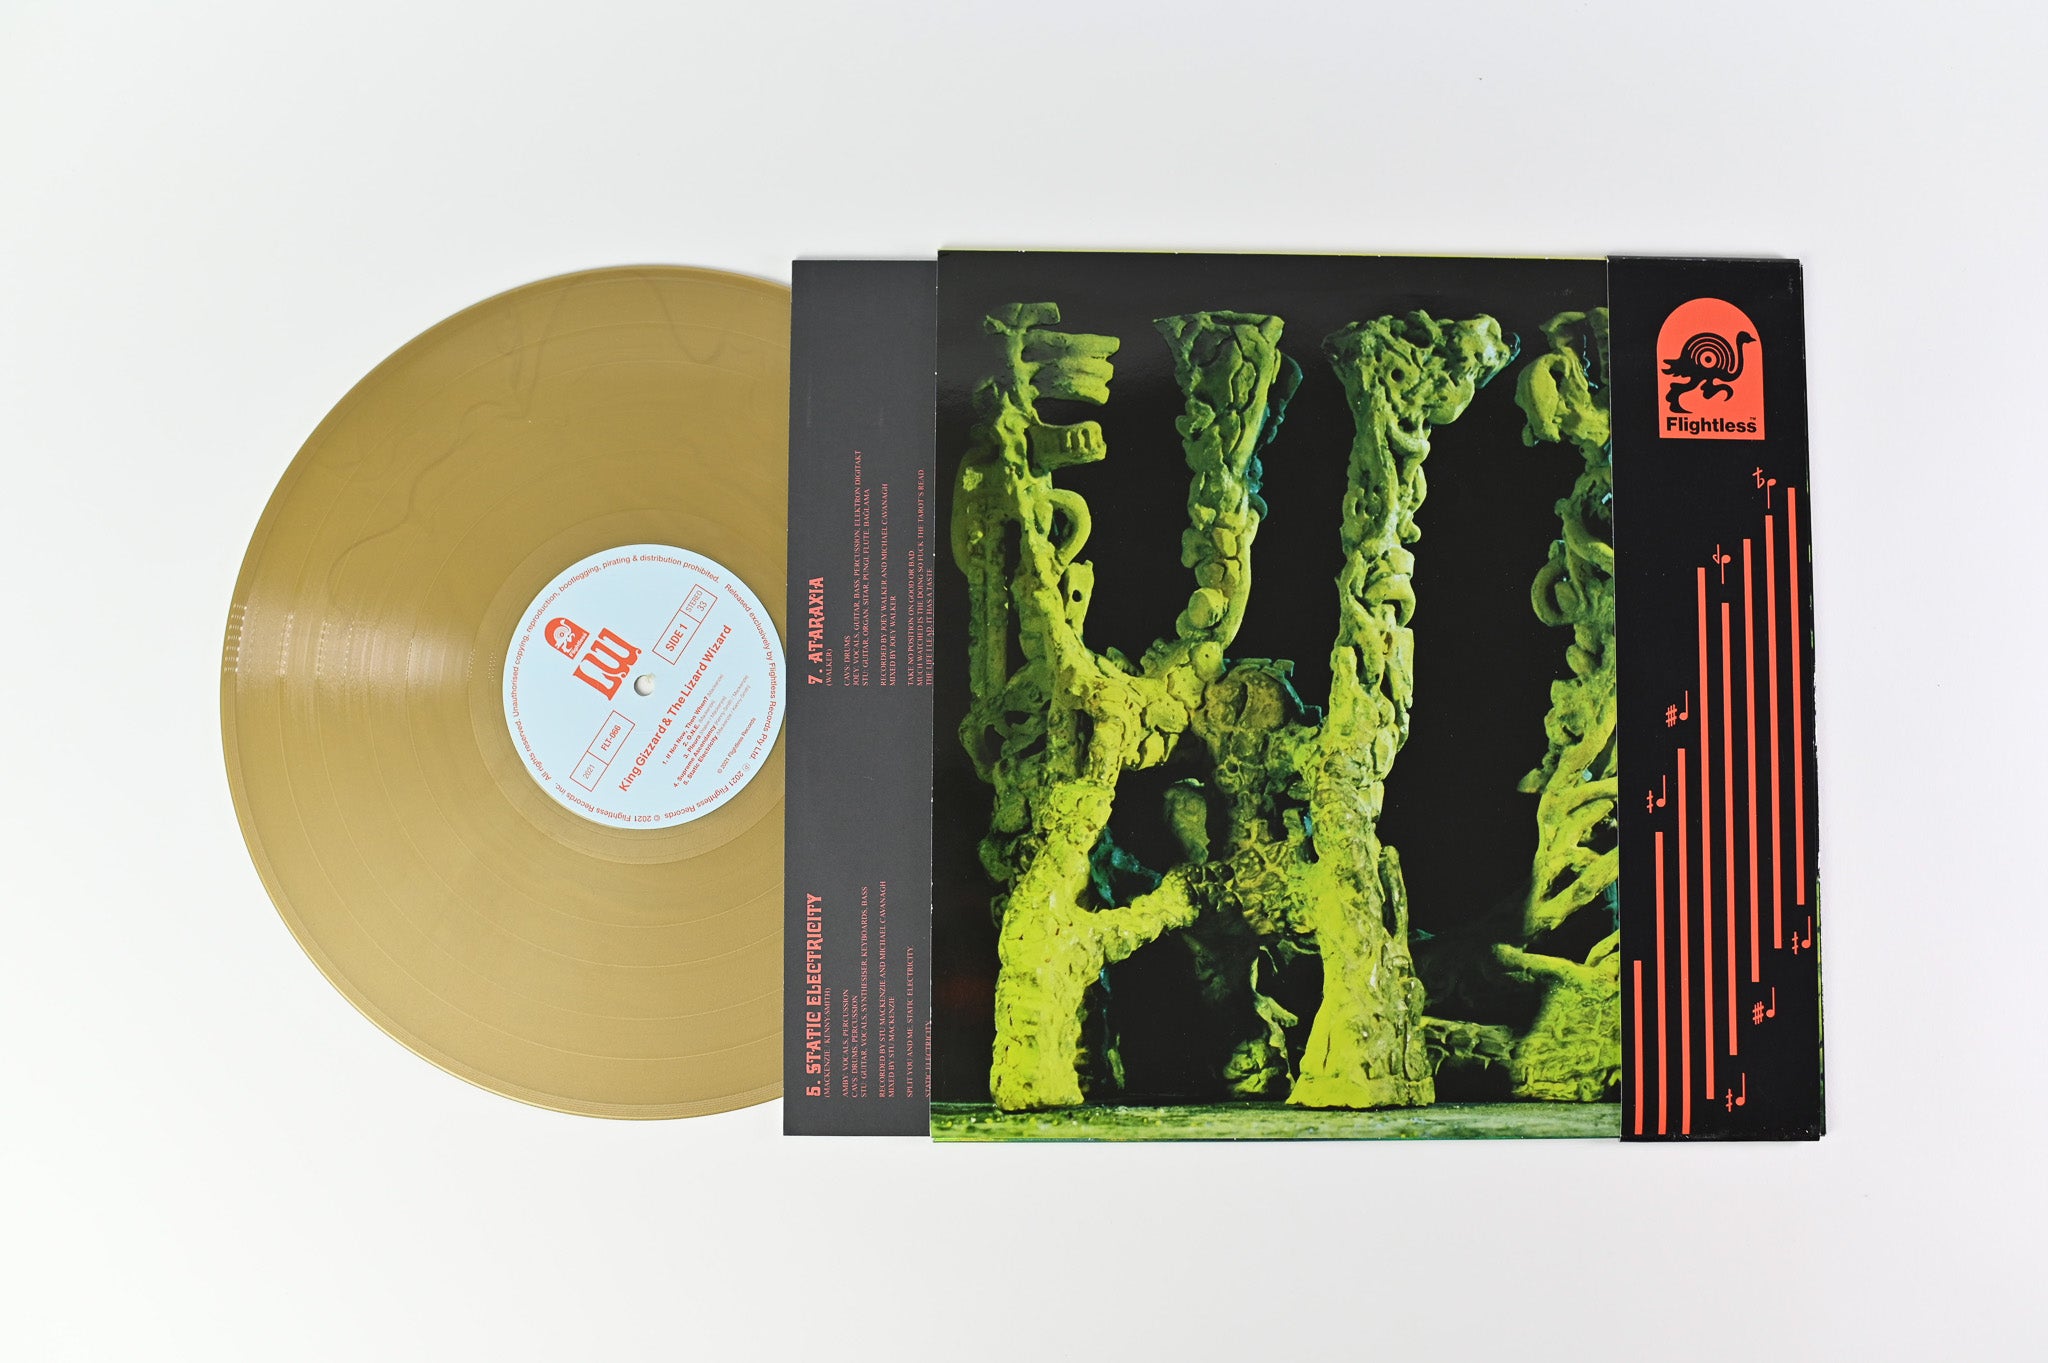 King Gizzard And The Lizard Wizard - L.W. (Explorations Into Microtonal Tuning Volume 3) on Flightless Ltd Golden Delicious Vinyl